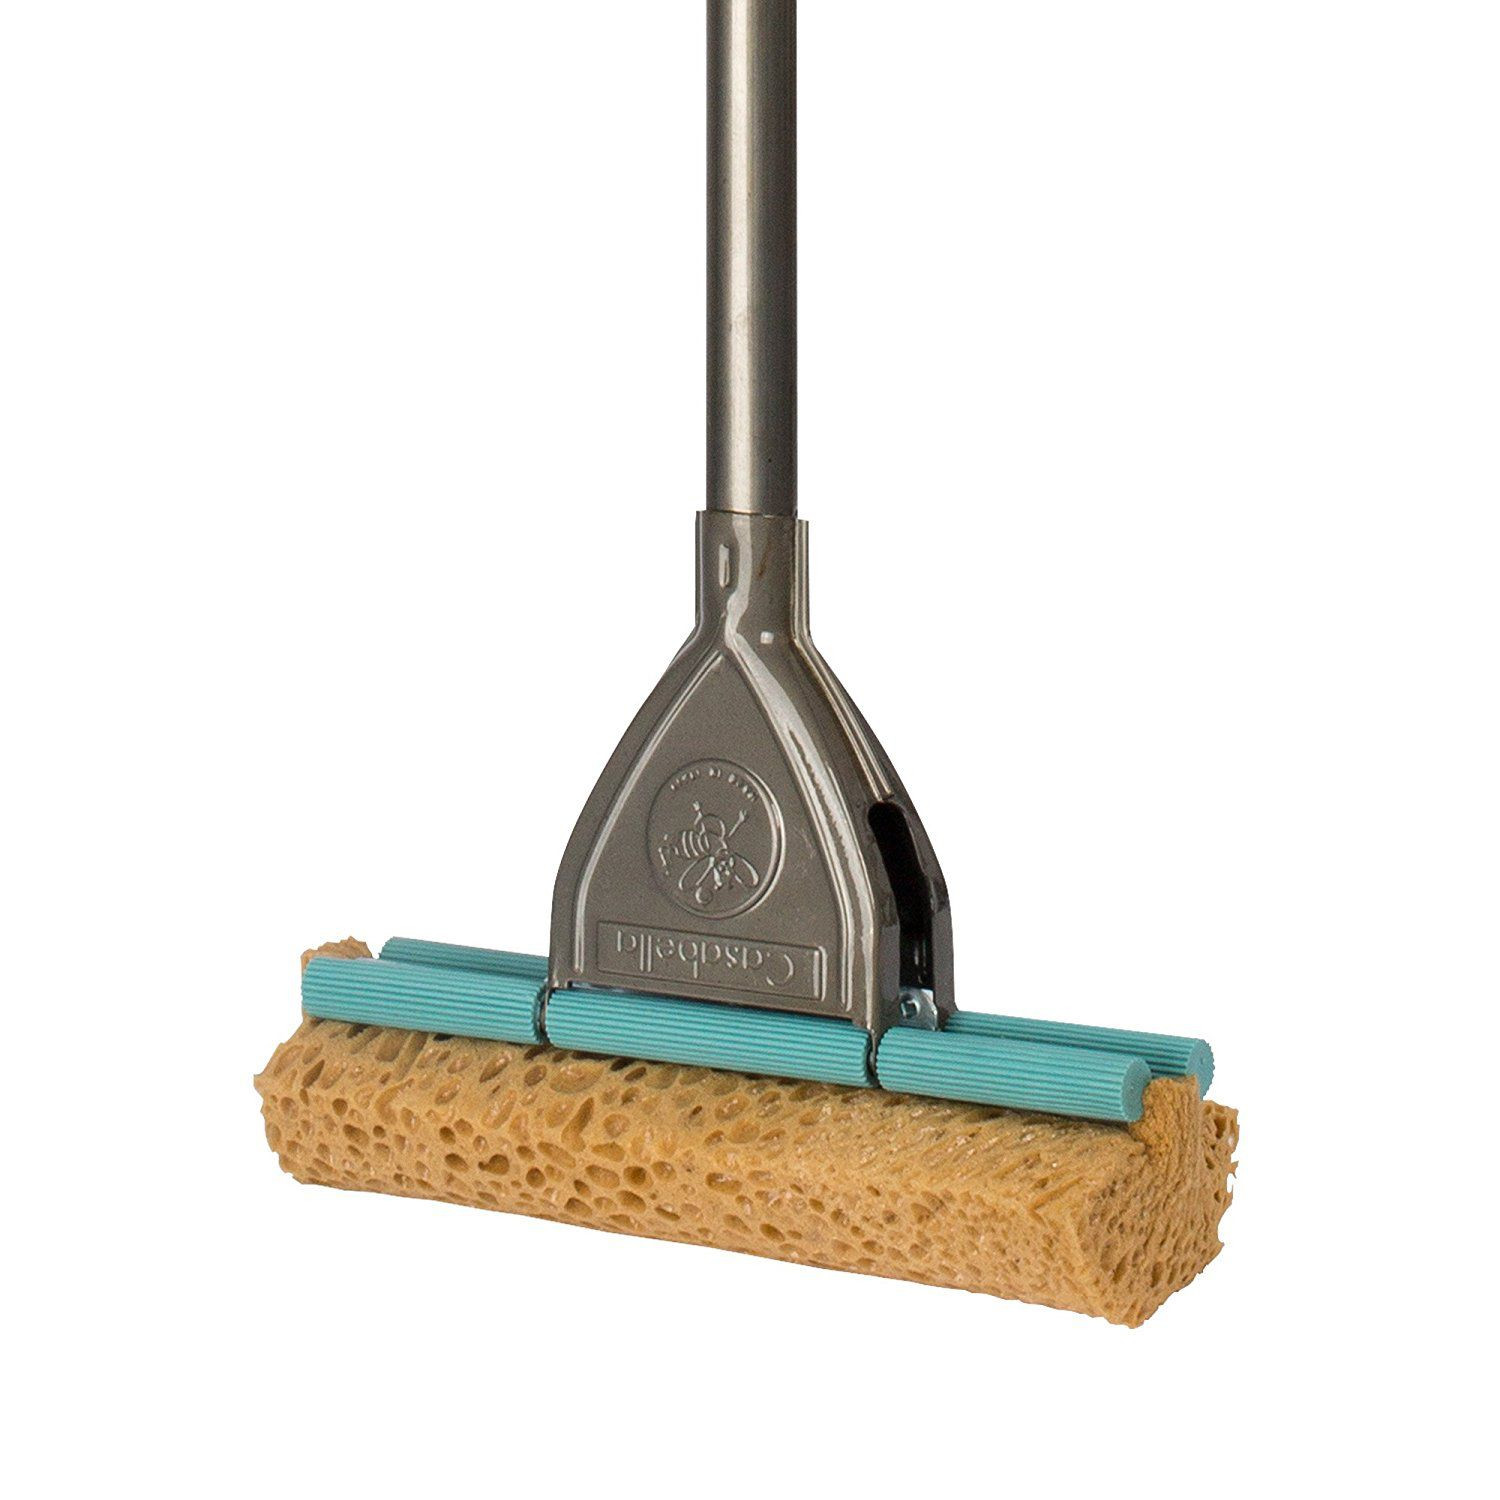 28 Lovely Amazon Hardwood Floor Mop 2024 free download amazon hardwood floor mop of best sponge mops for your home in 2018 pertaining to casabella original mop 58ff95153df78ca1597023b2